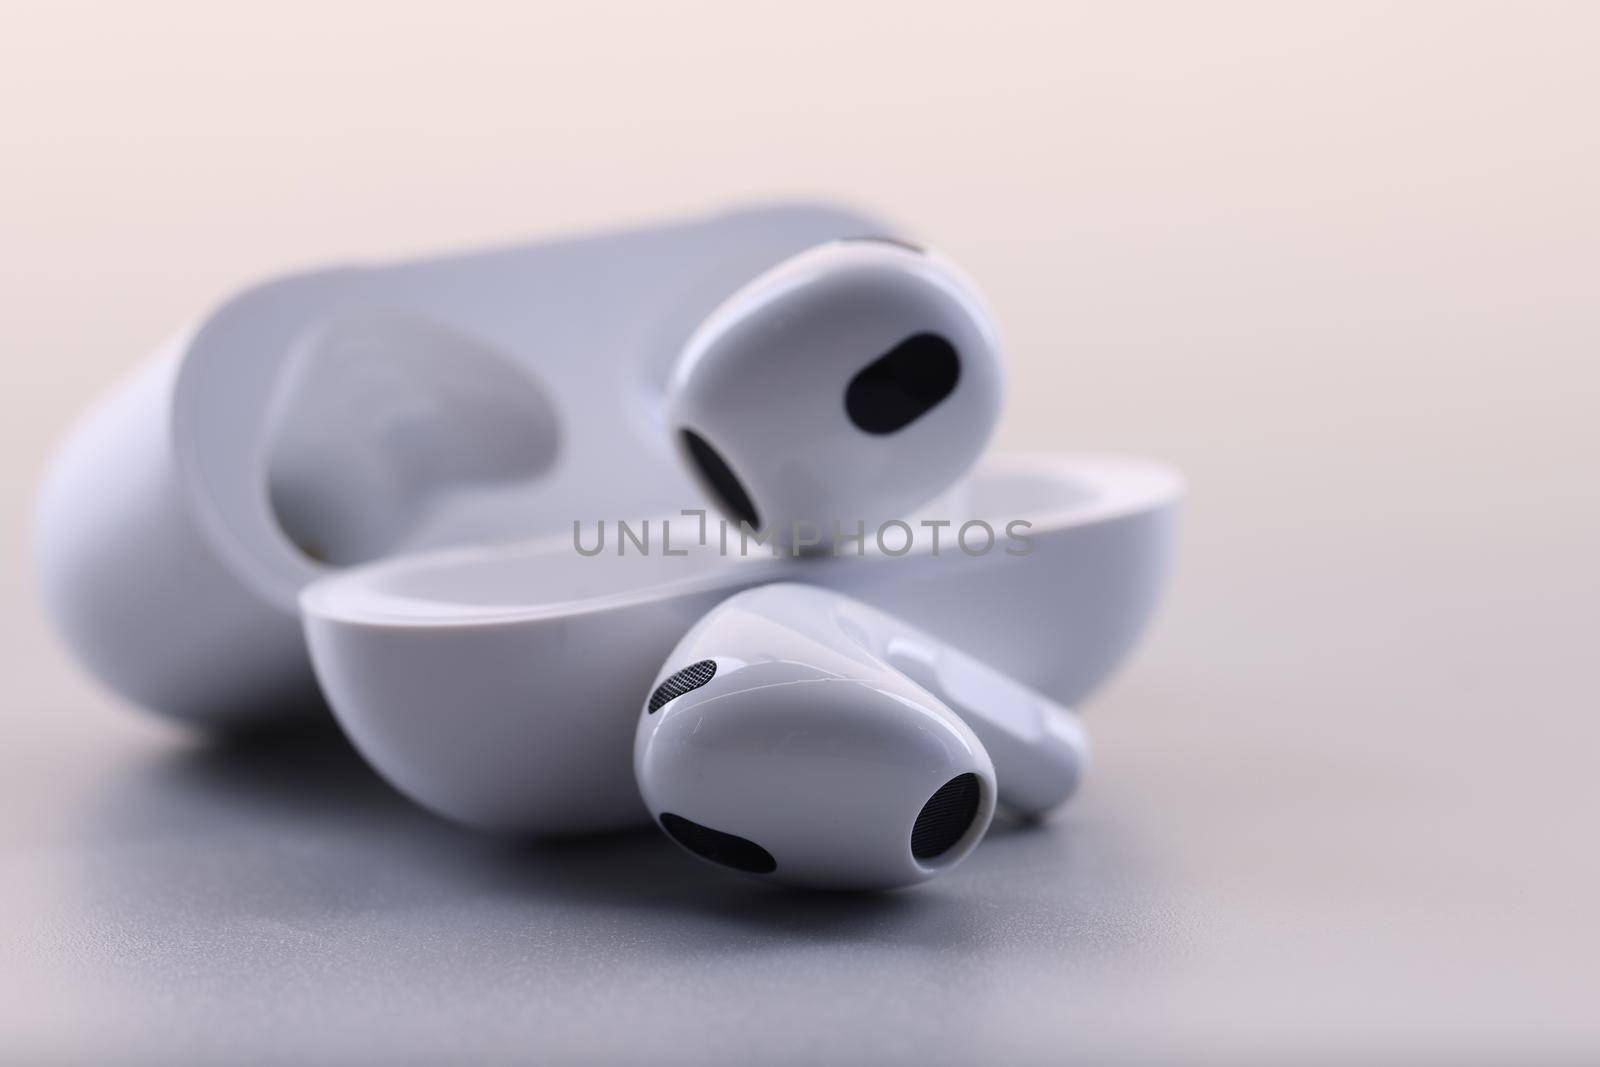 White electronic bluetooth headphones and technical cases on white background. Fashion stylish headphones concept